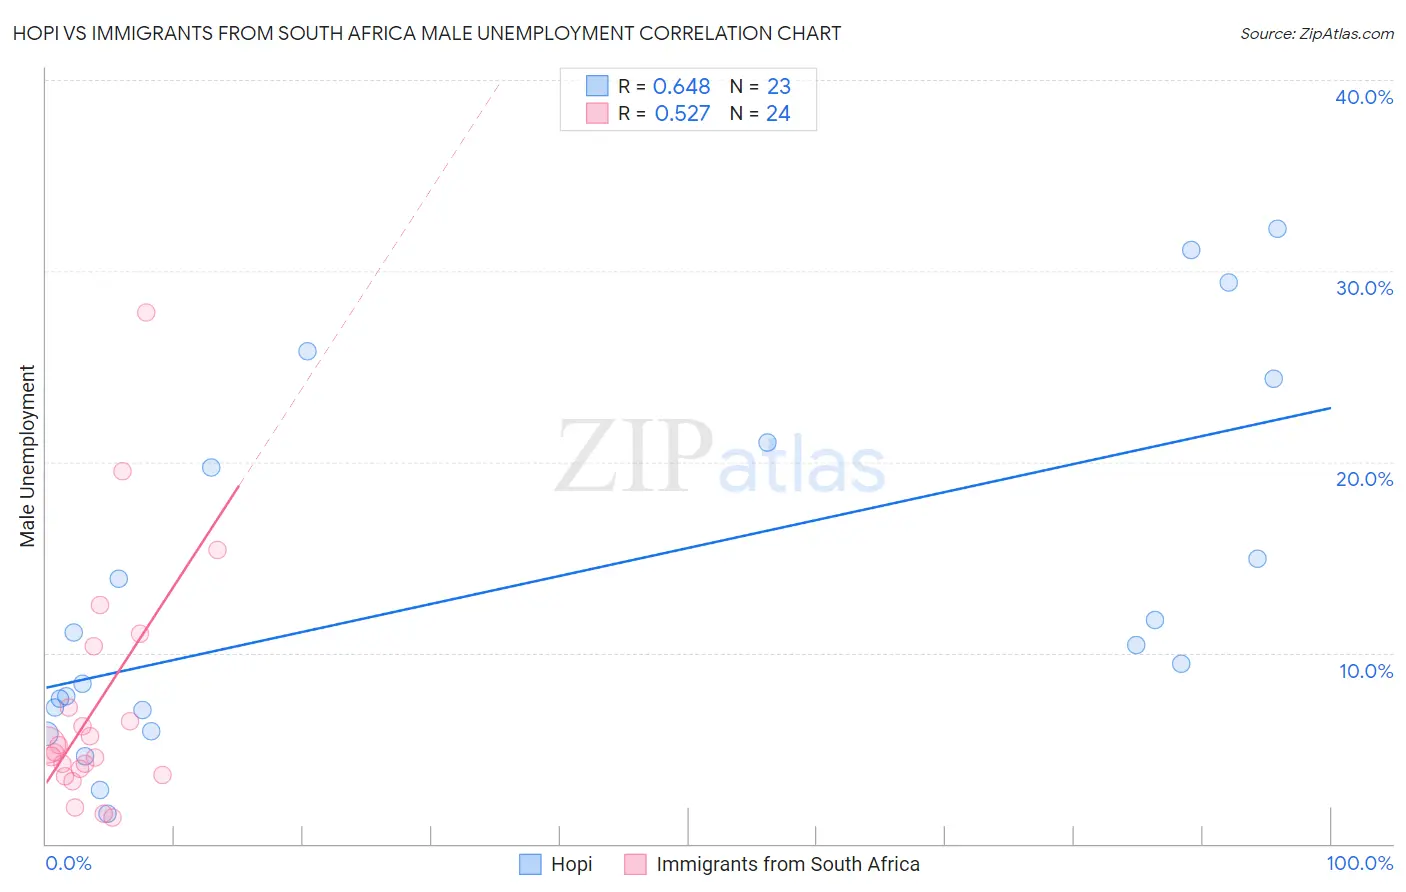 Hopi vs Immigrants from South Africa Male Unemployment